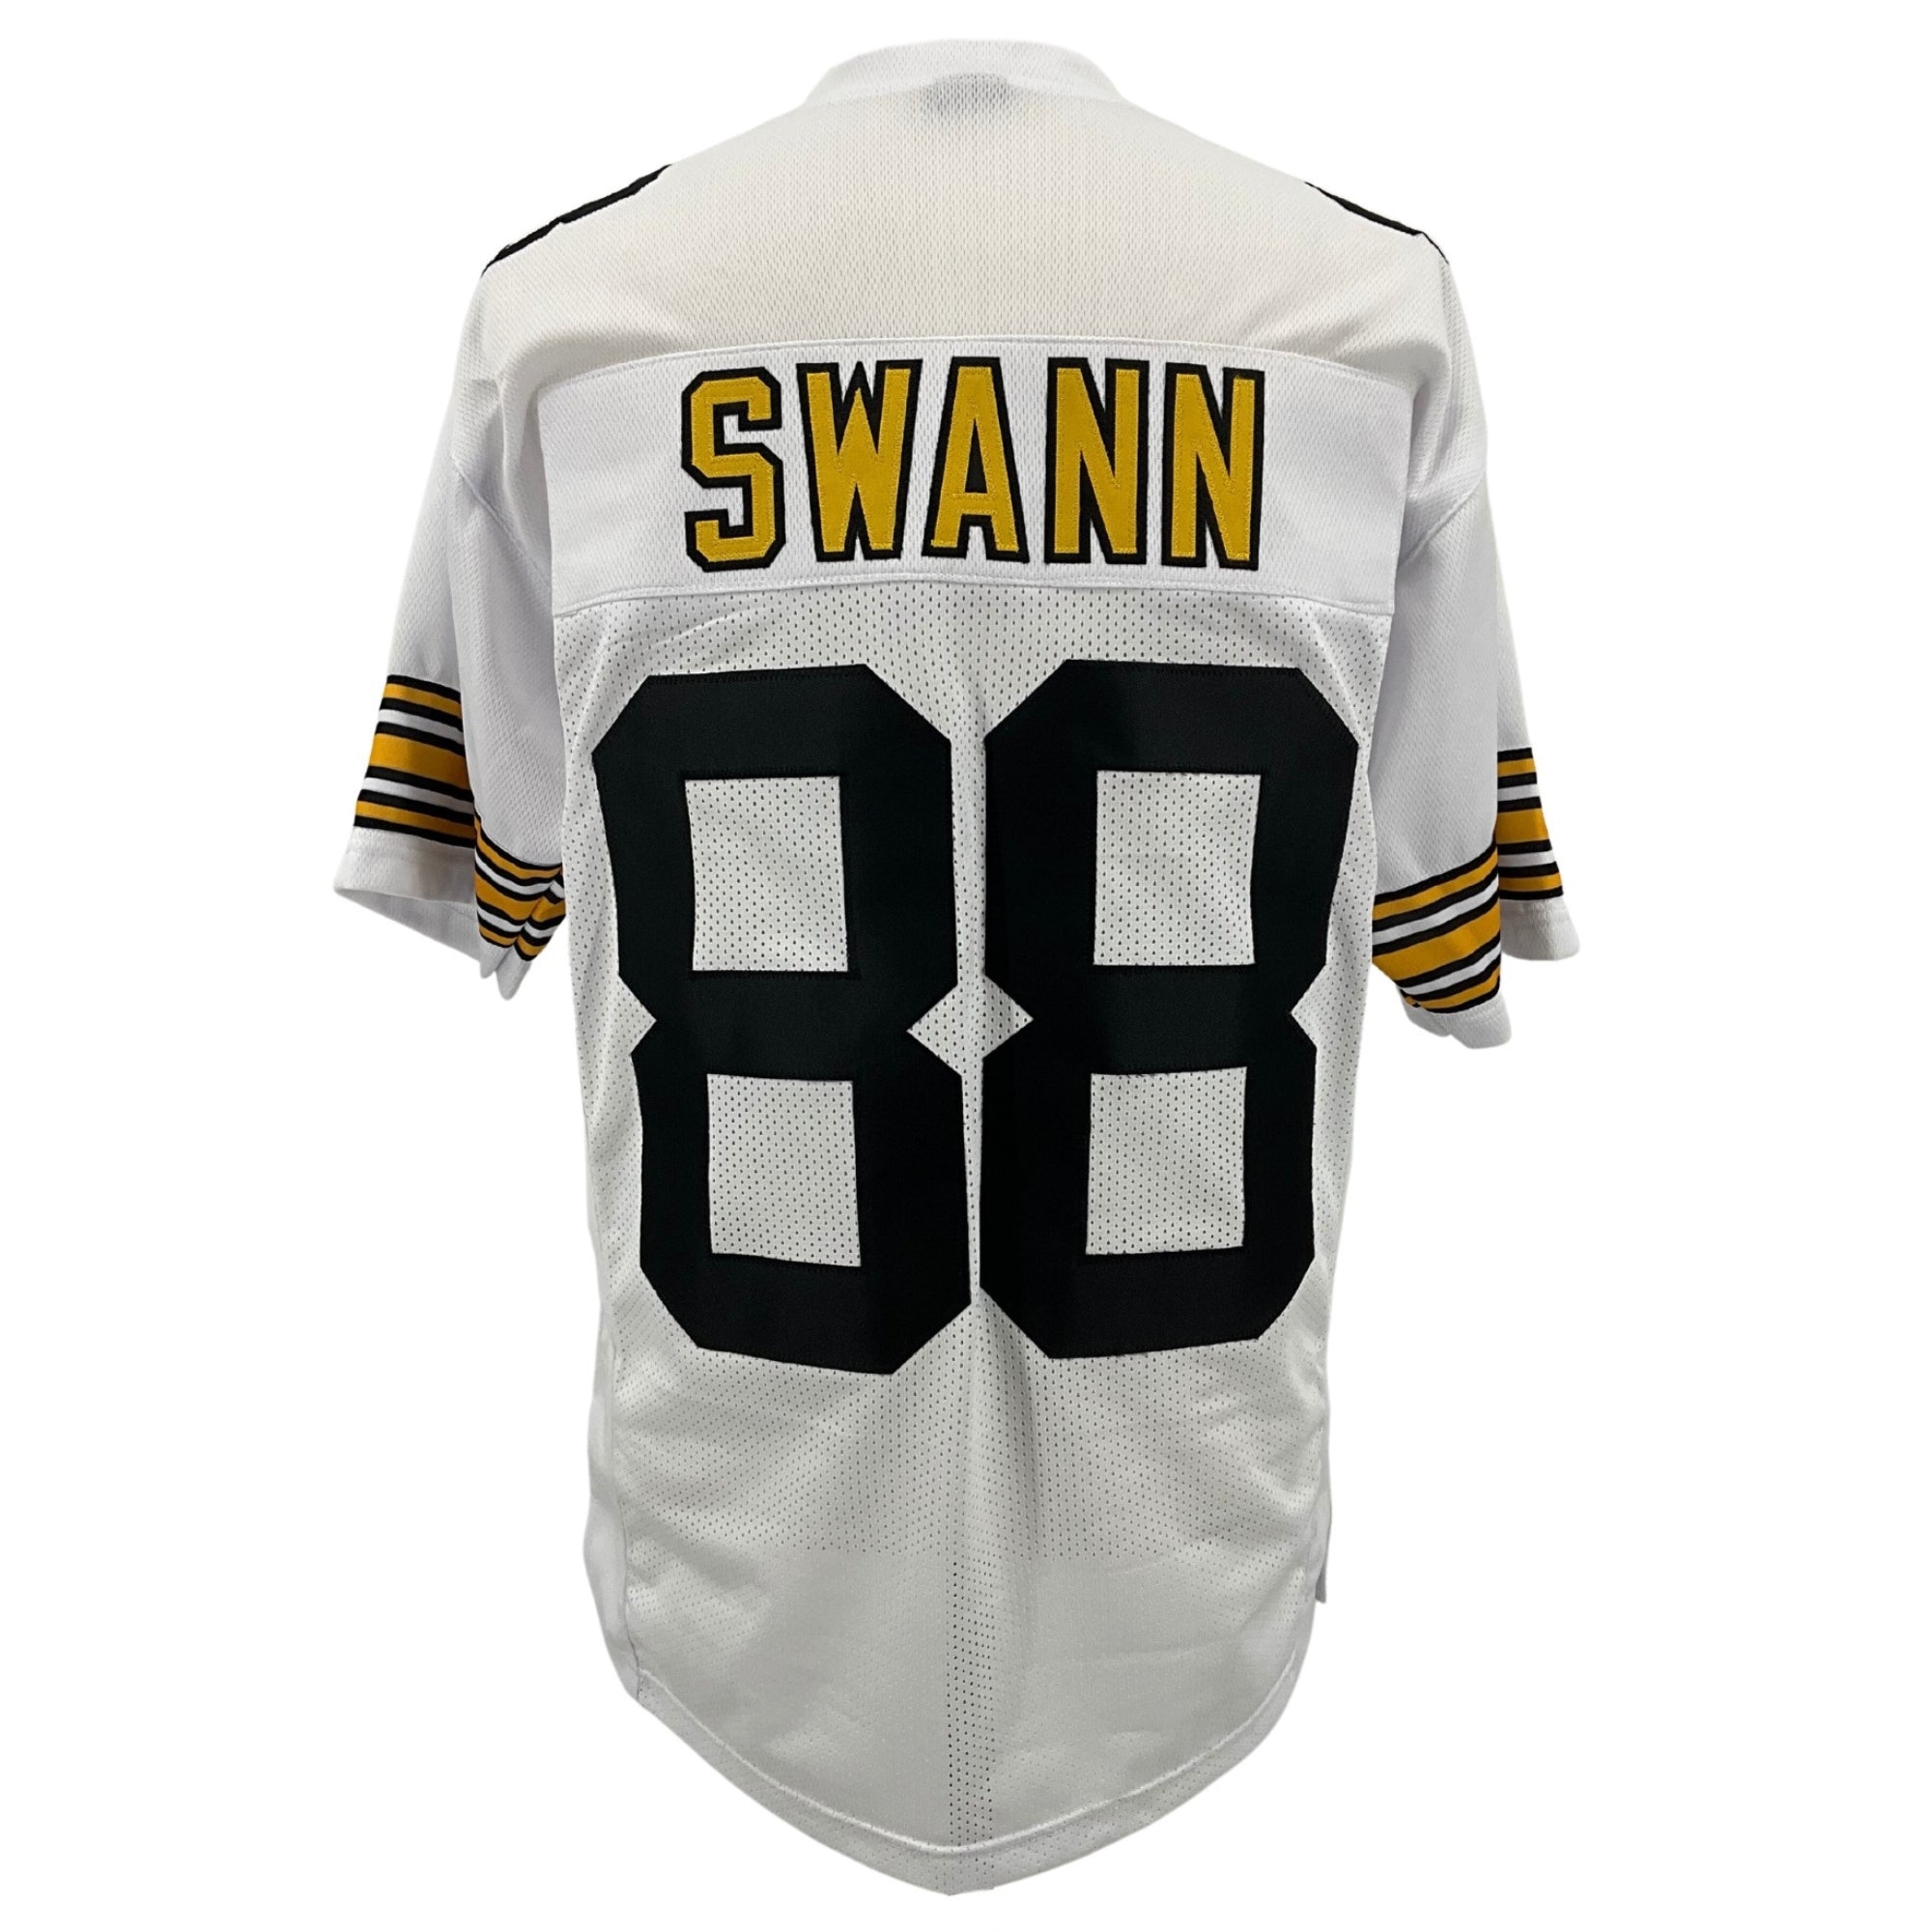 LYNN SWANN Steelers WHITE Old Number Jersey M-5XL Unsigned Custom Sewn Stitched